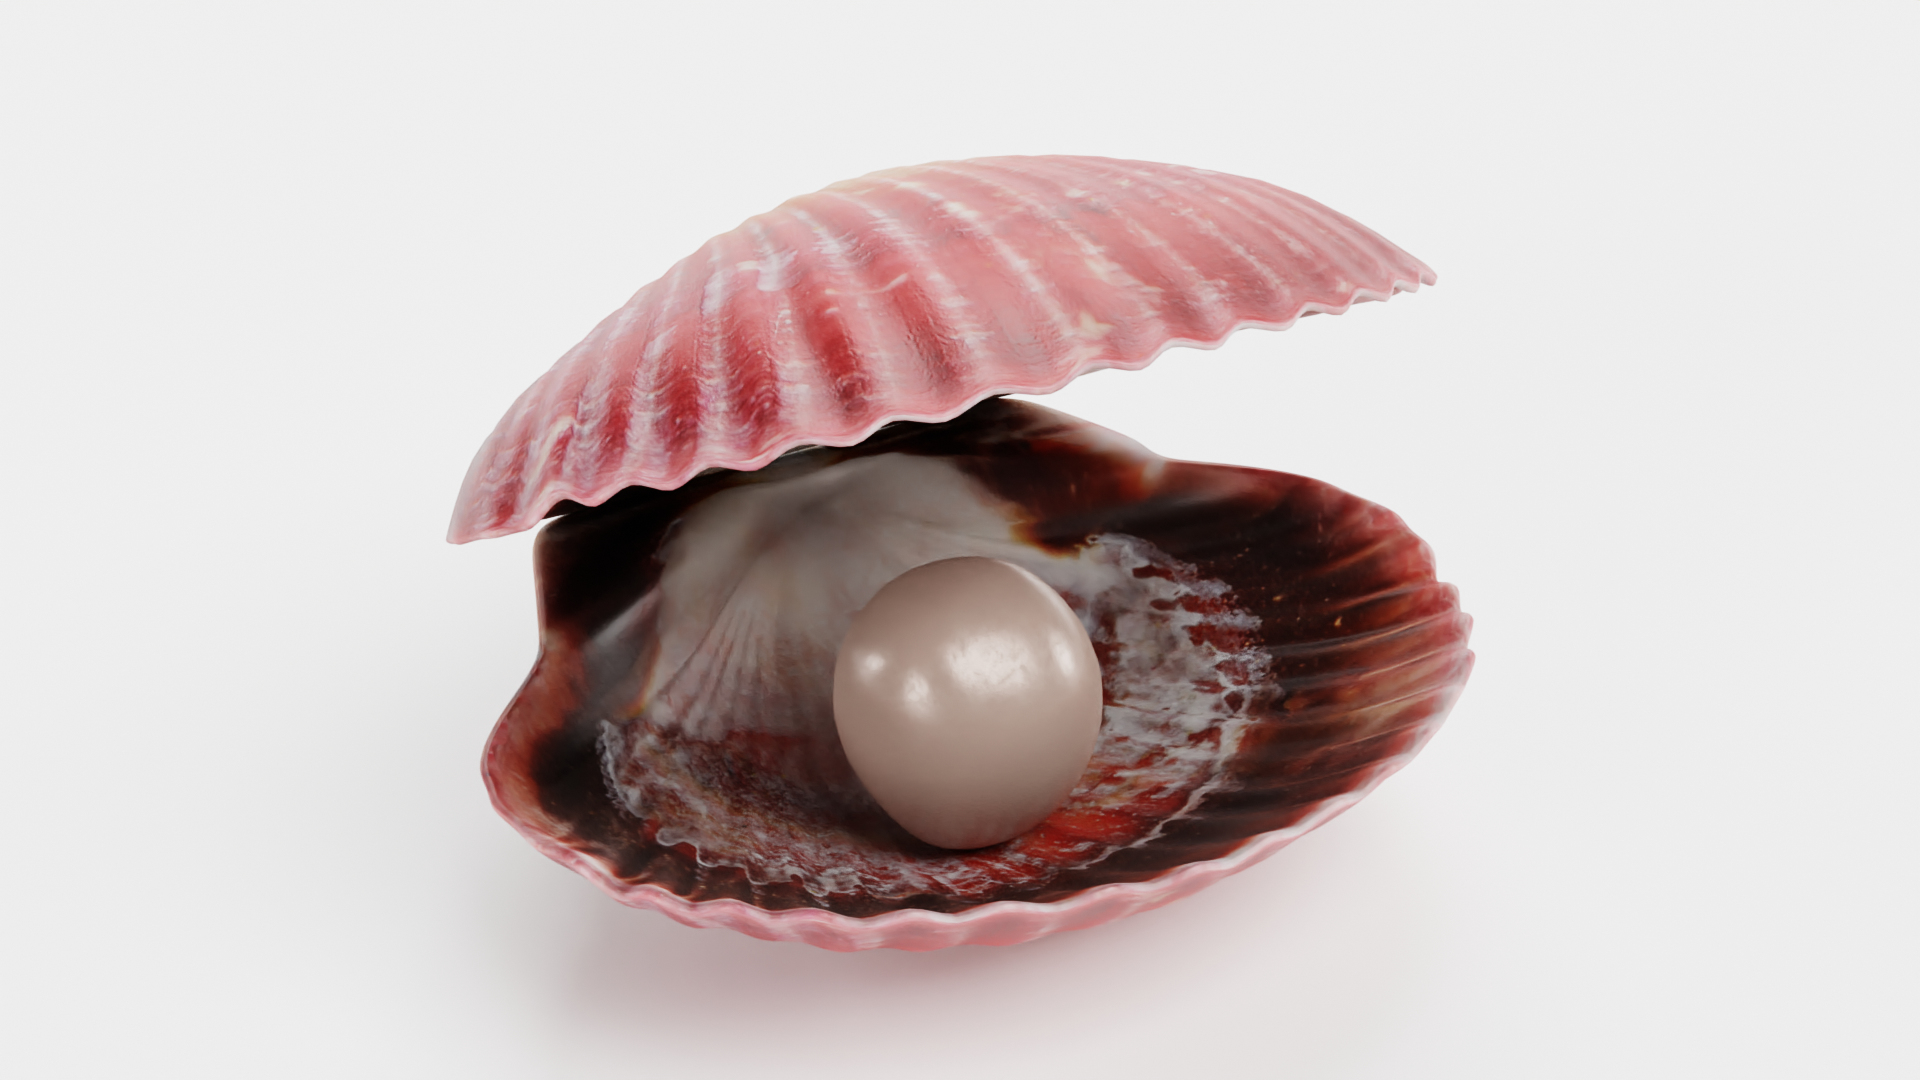 pink pearl clam